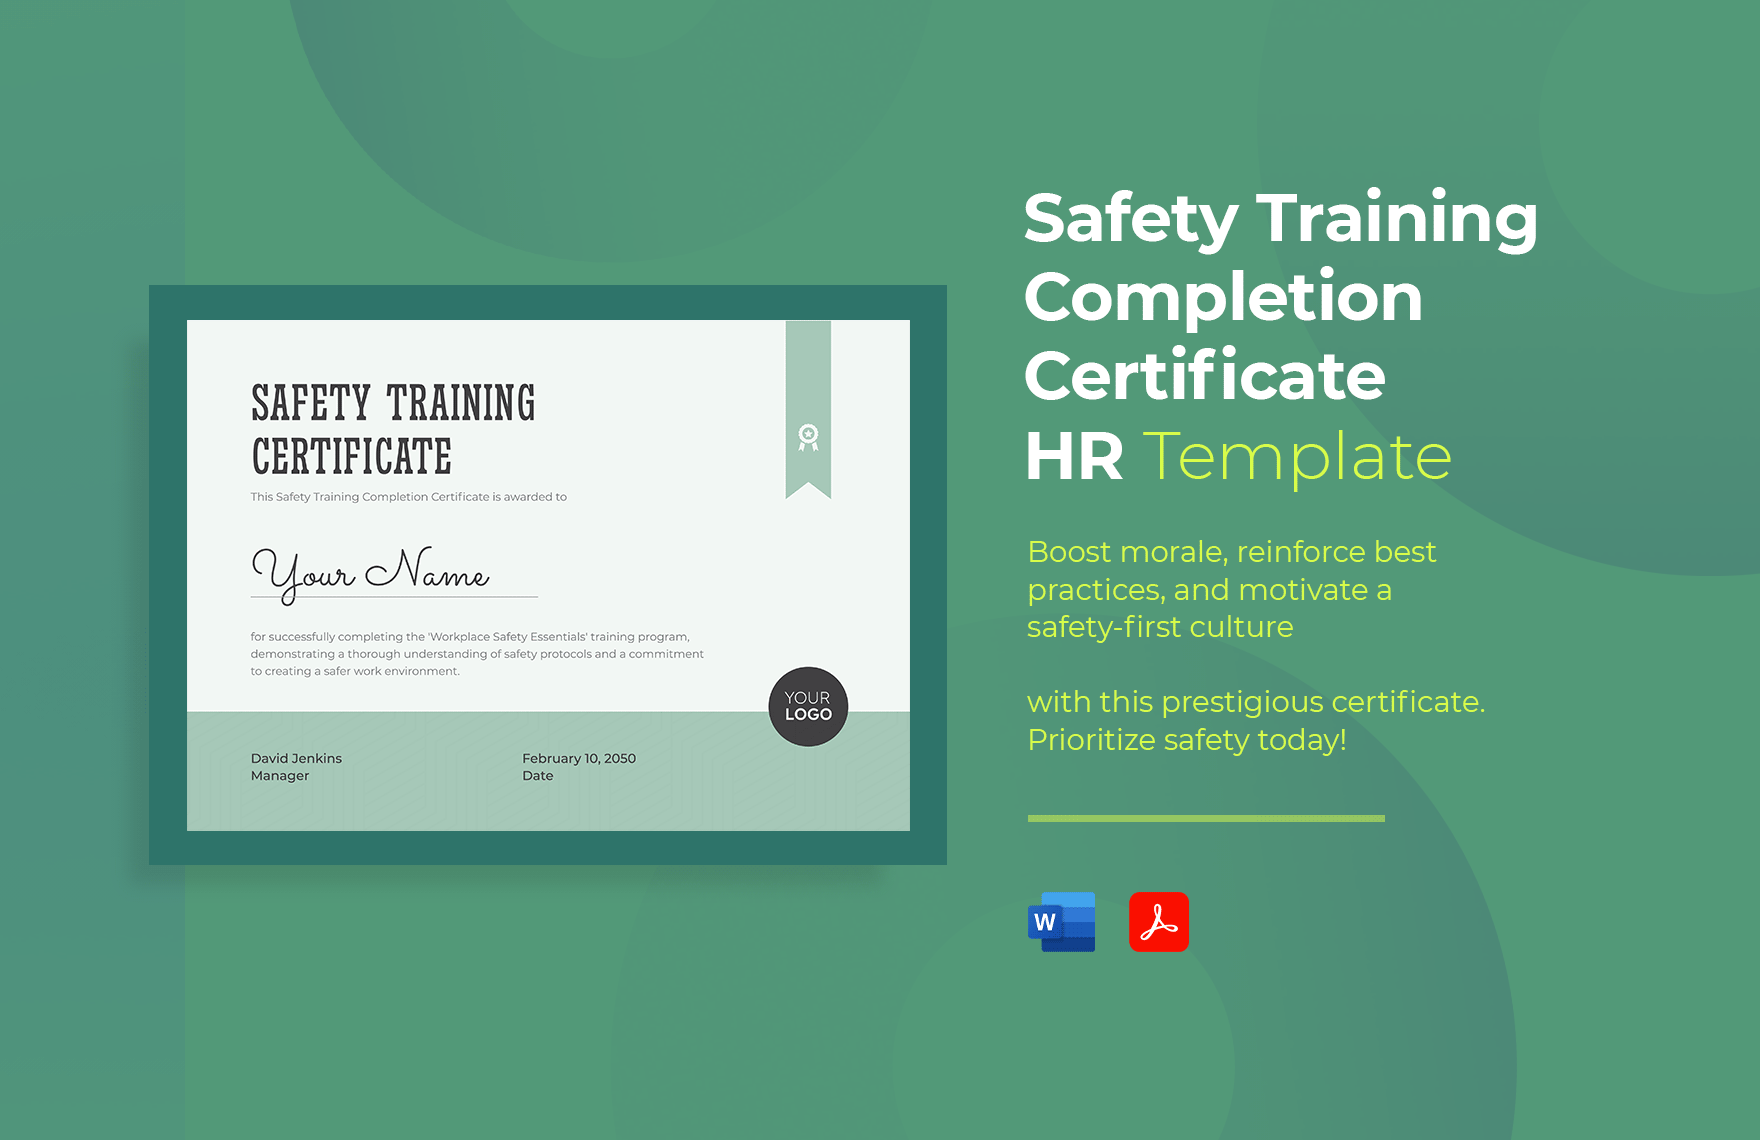 Safety Training Completion Certificate HR Template